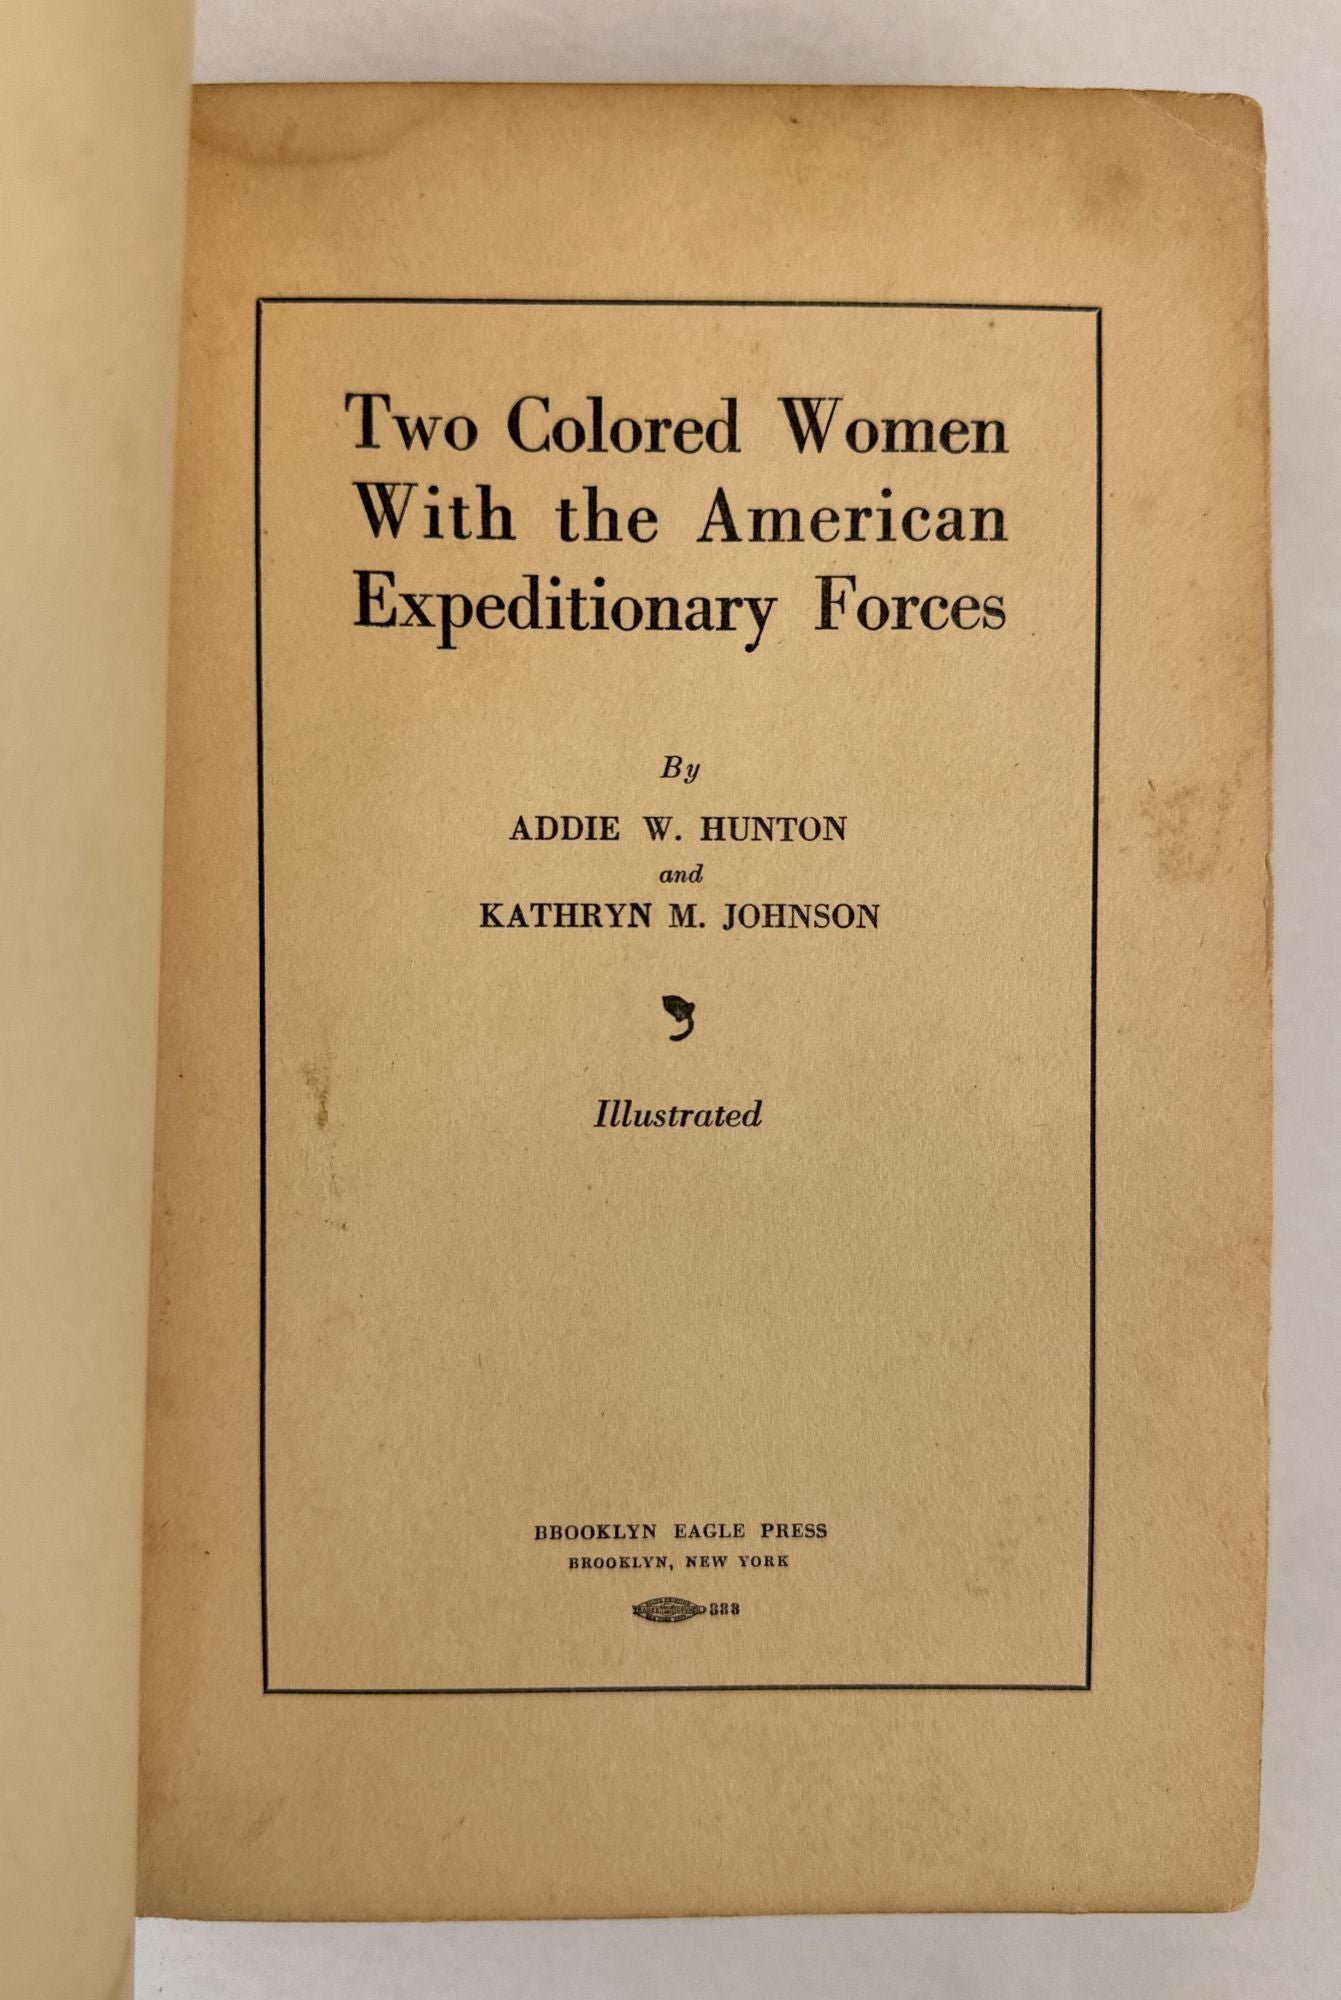 Product Image for TWO COLORED WOMEN WITH THE AMERICAN EXPEDITIONARY FORCES